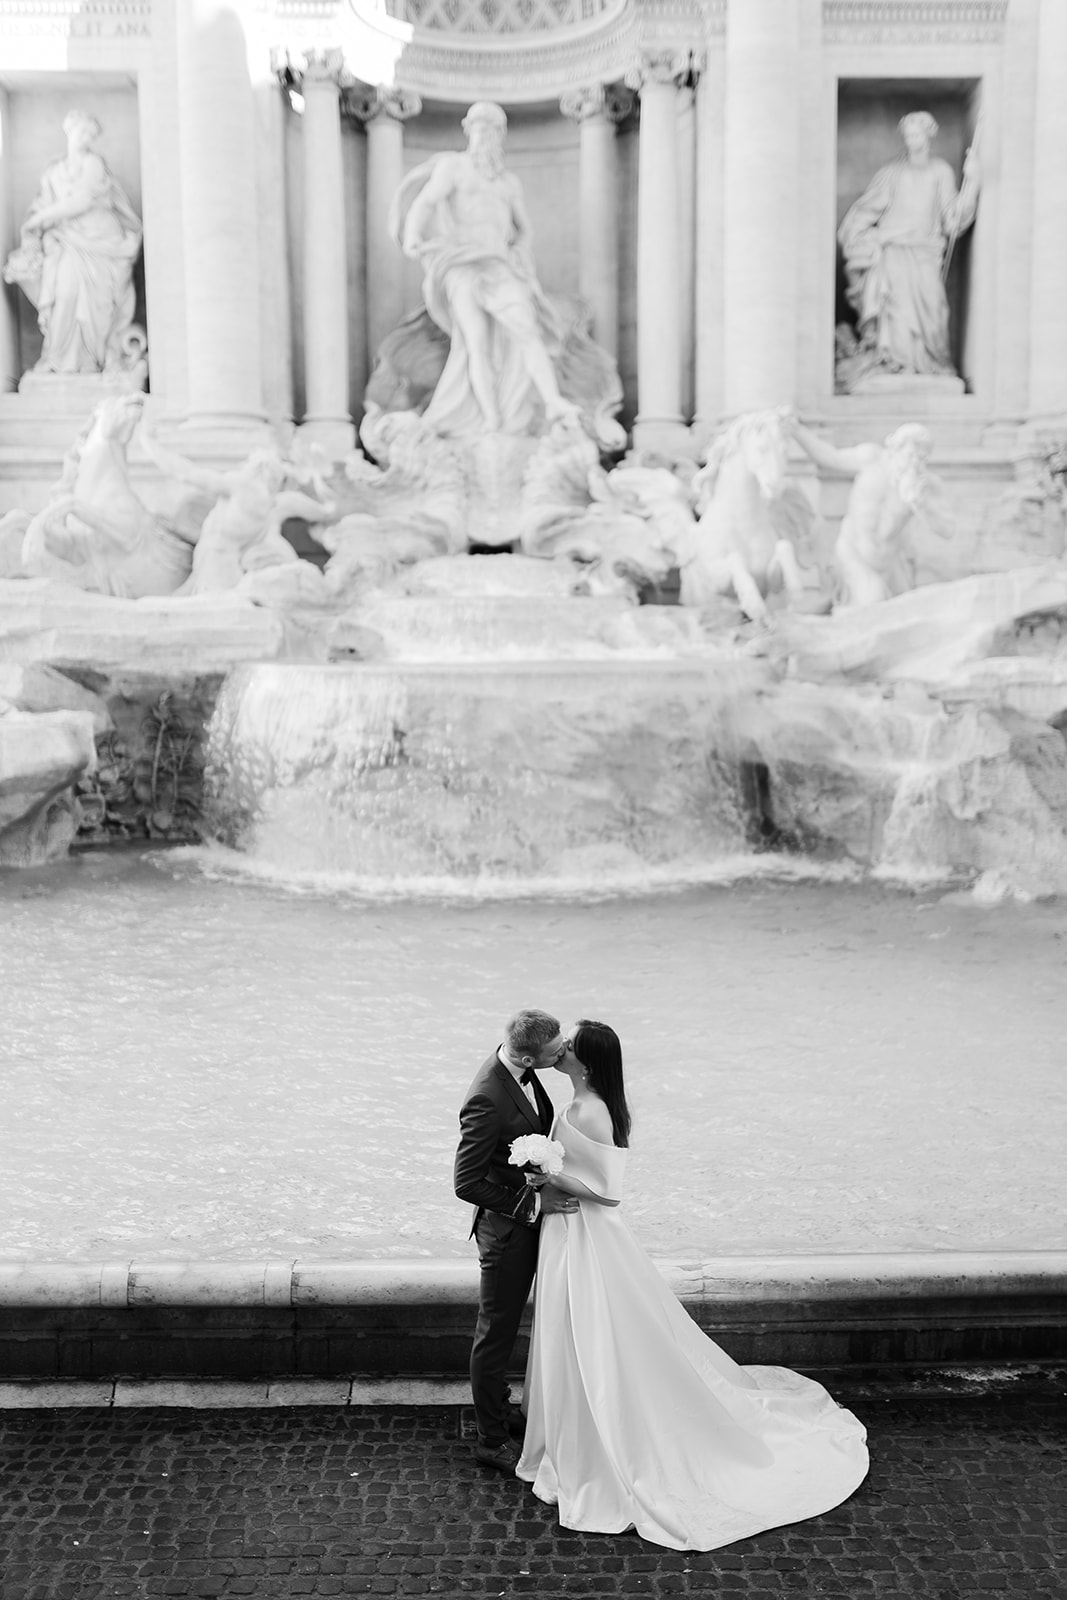 After wedding photoshoot in Rome. Wedding photos in front of the Trevi fountain photographed by Clara Buchberger